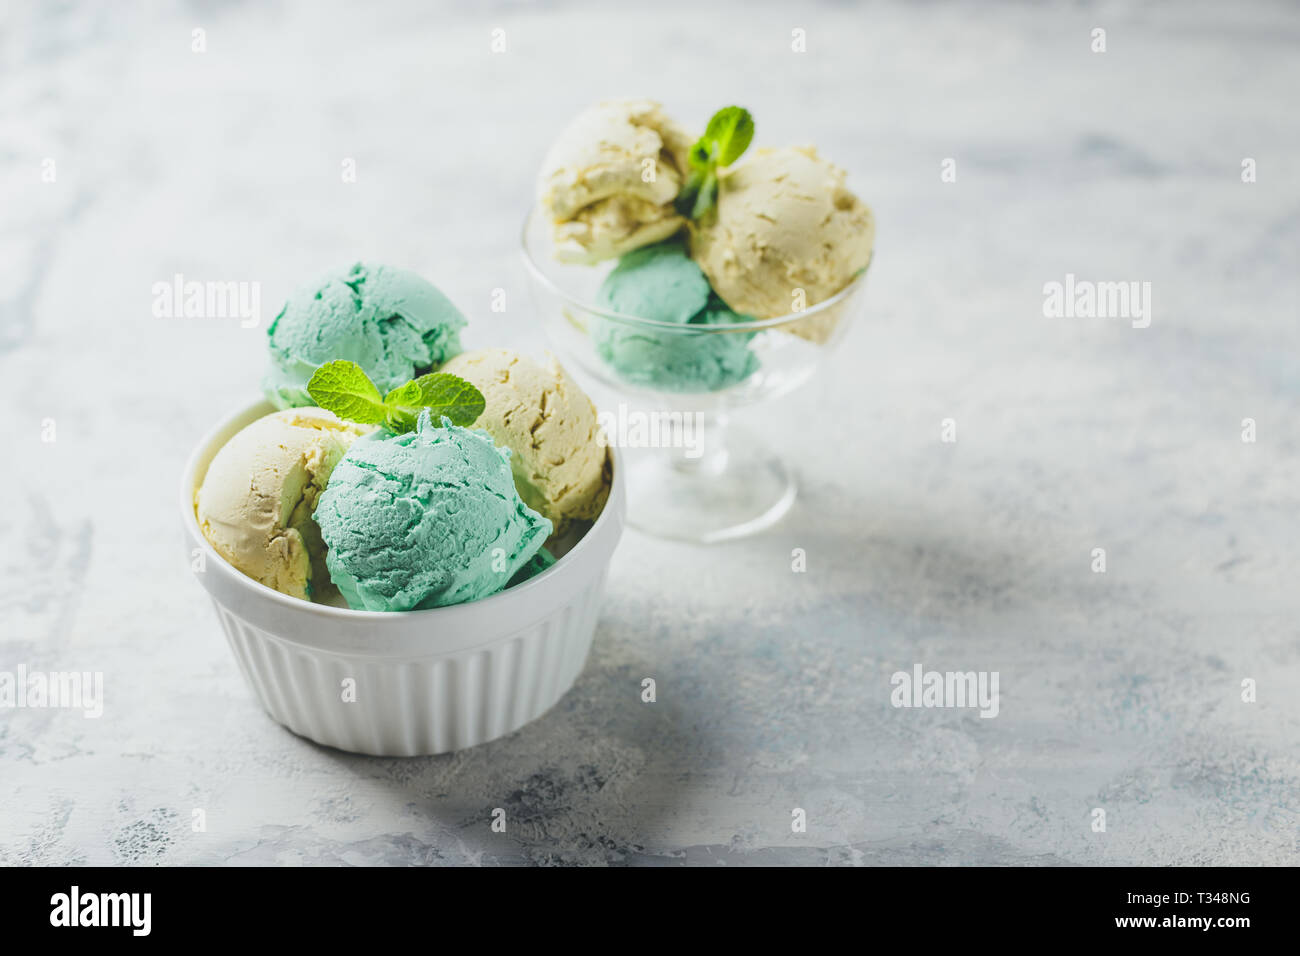 Mint and lemon ice cream with mint leaves in ceramic bowl on light background Stock Photo